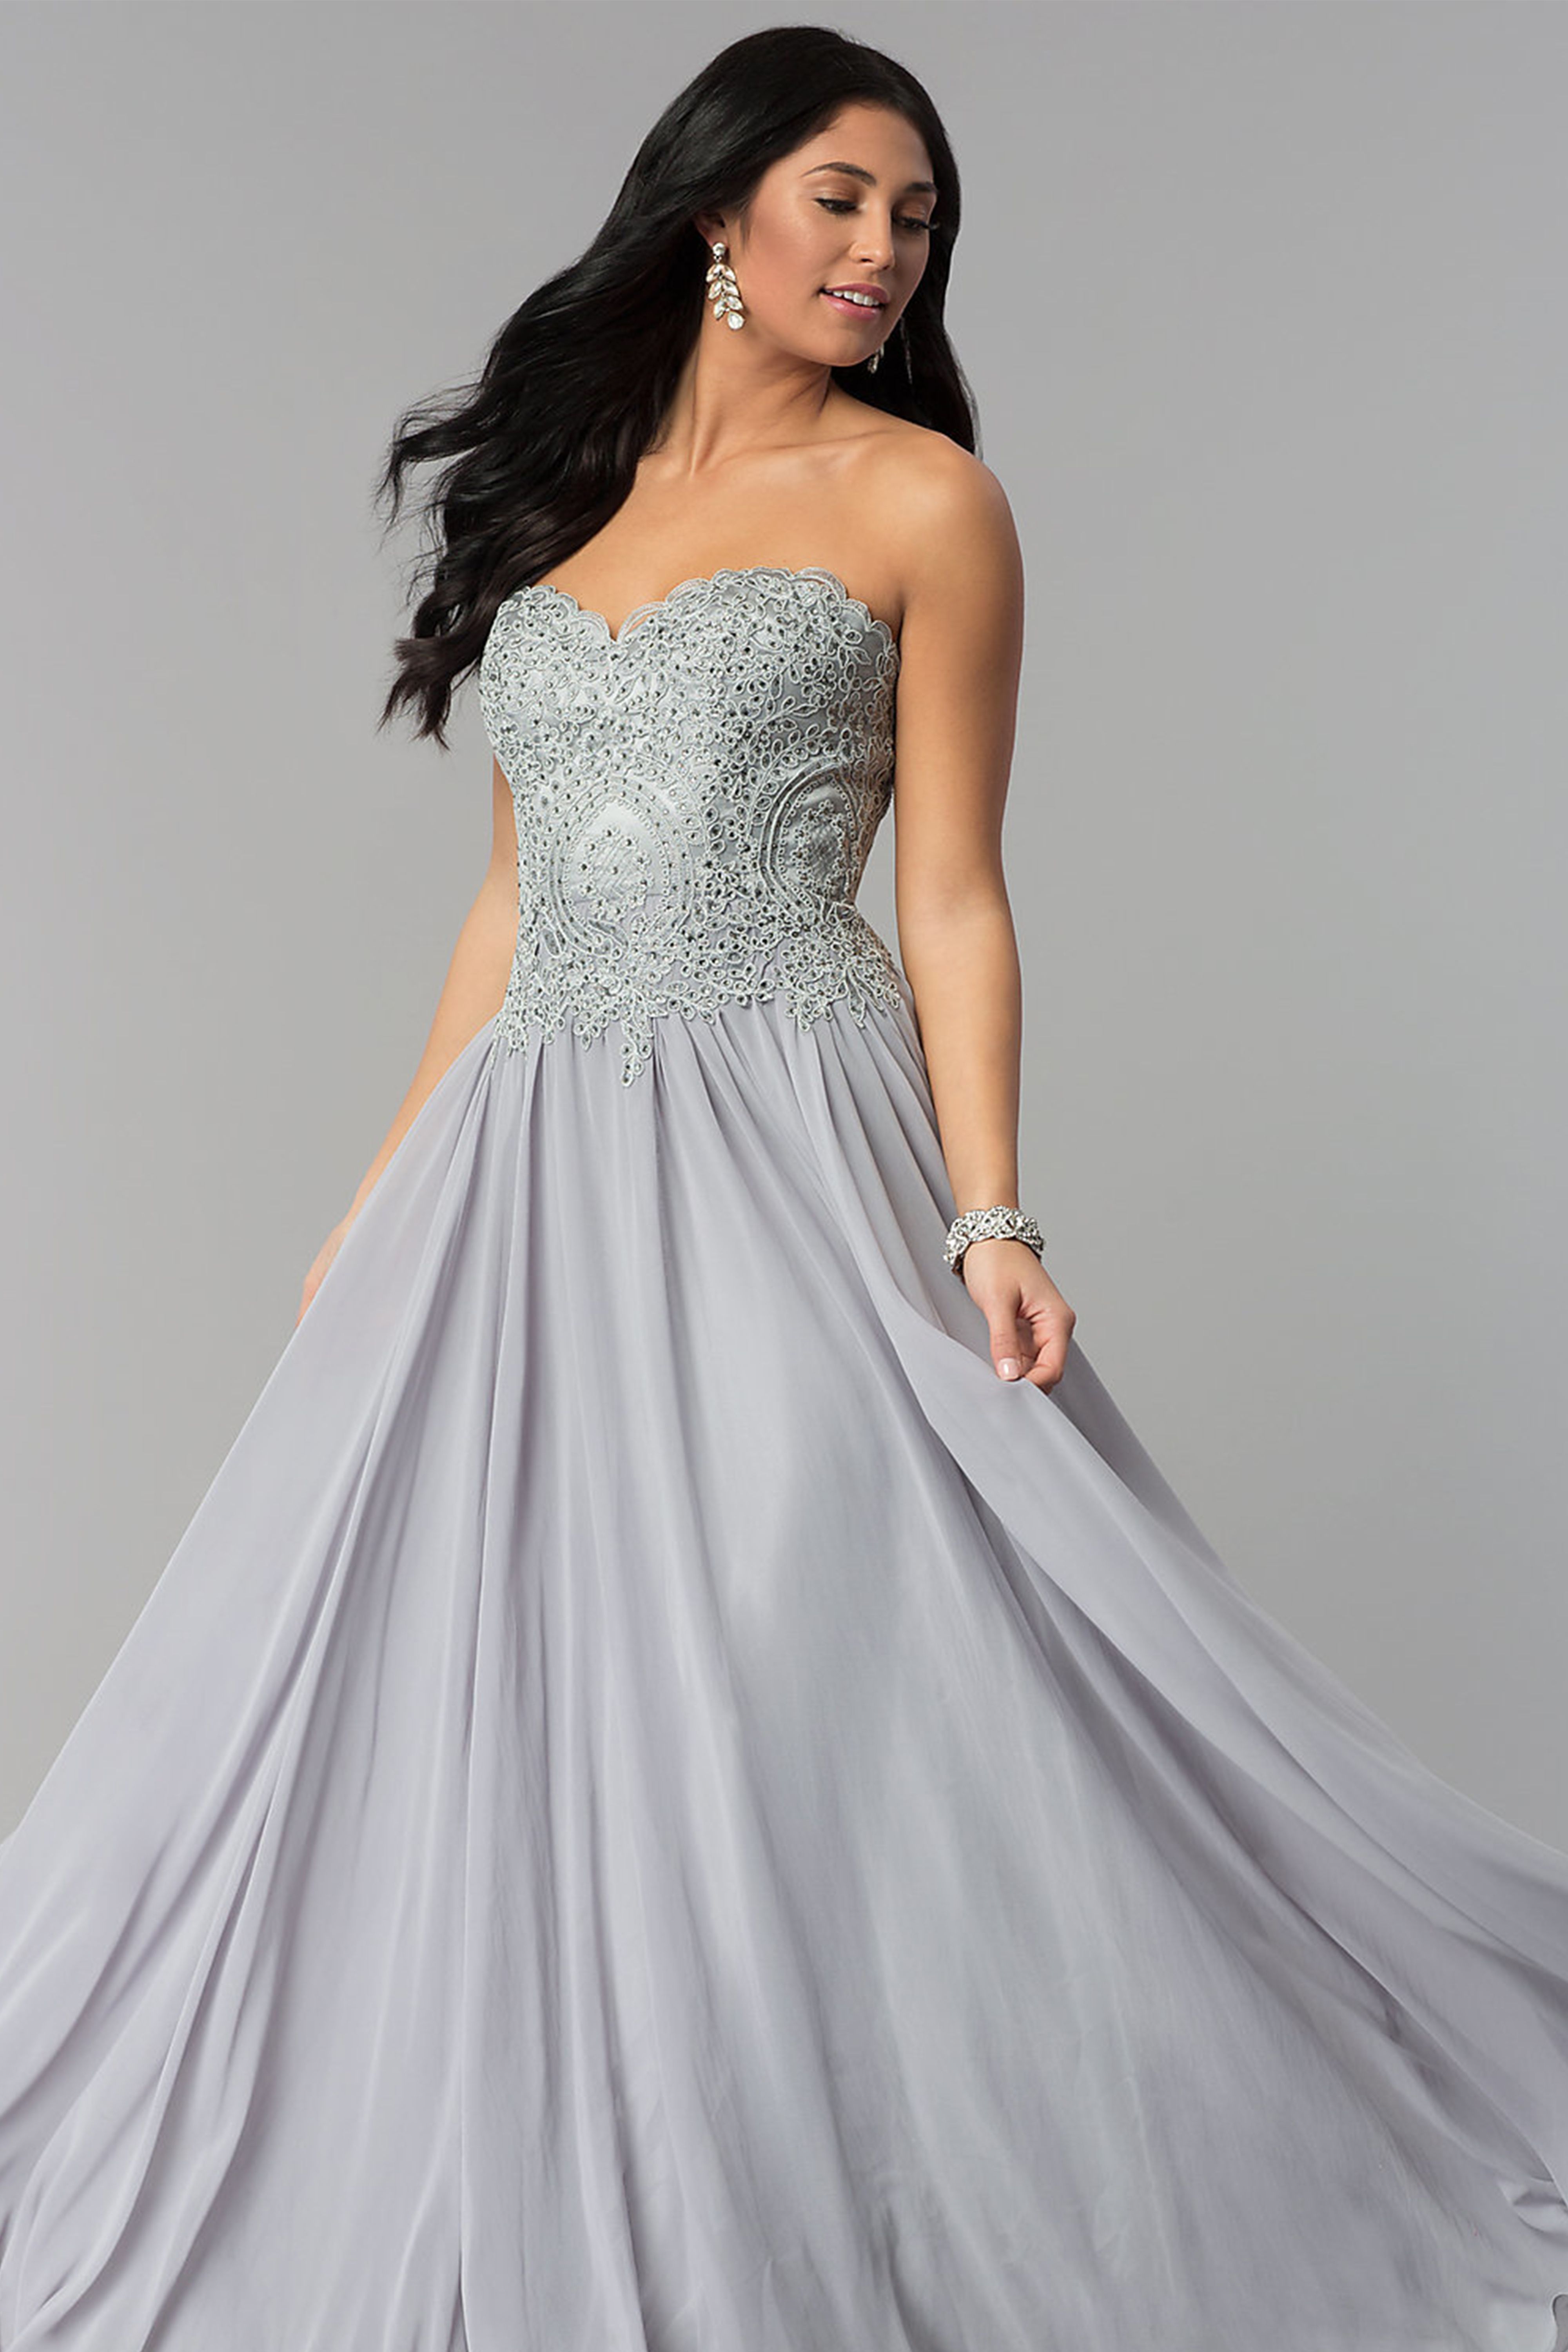 Gold, Silver and Metallic Prom Dresses ...